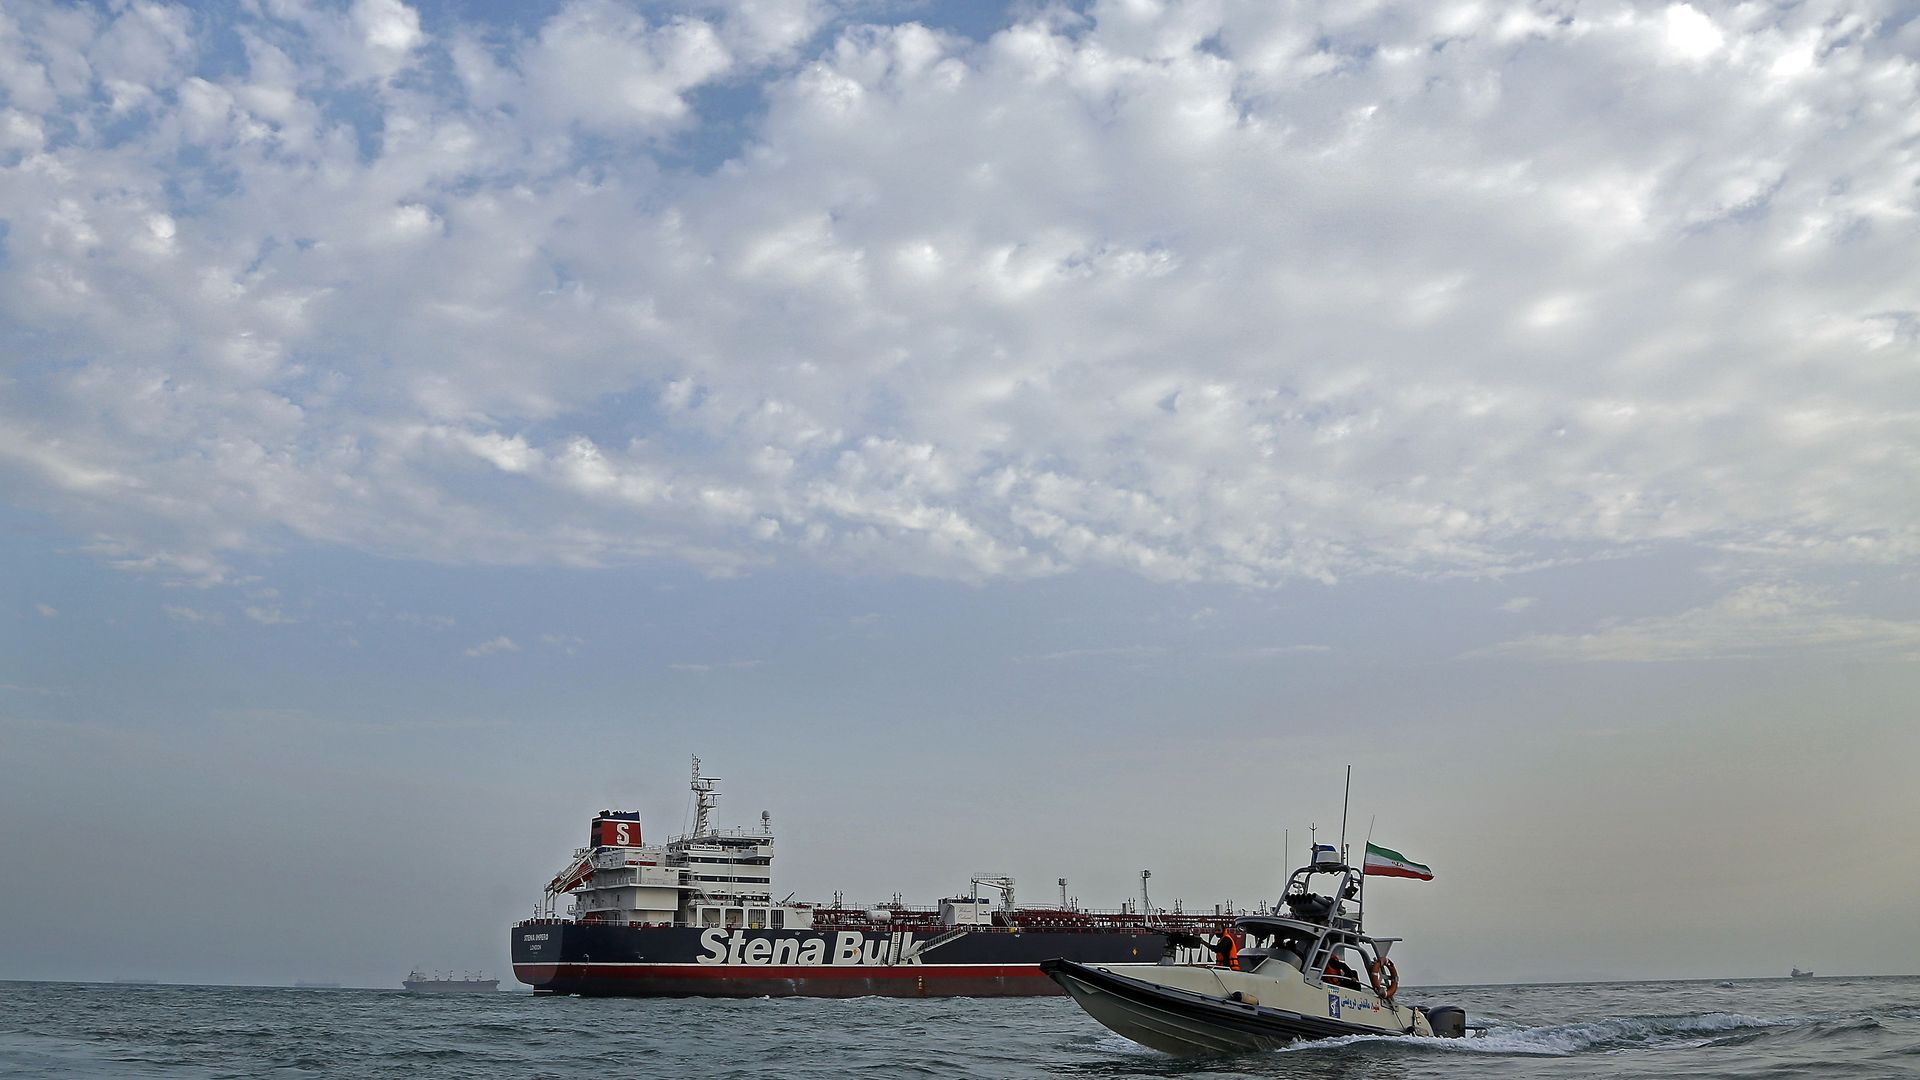 The Stena Impero being seized and detained.